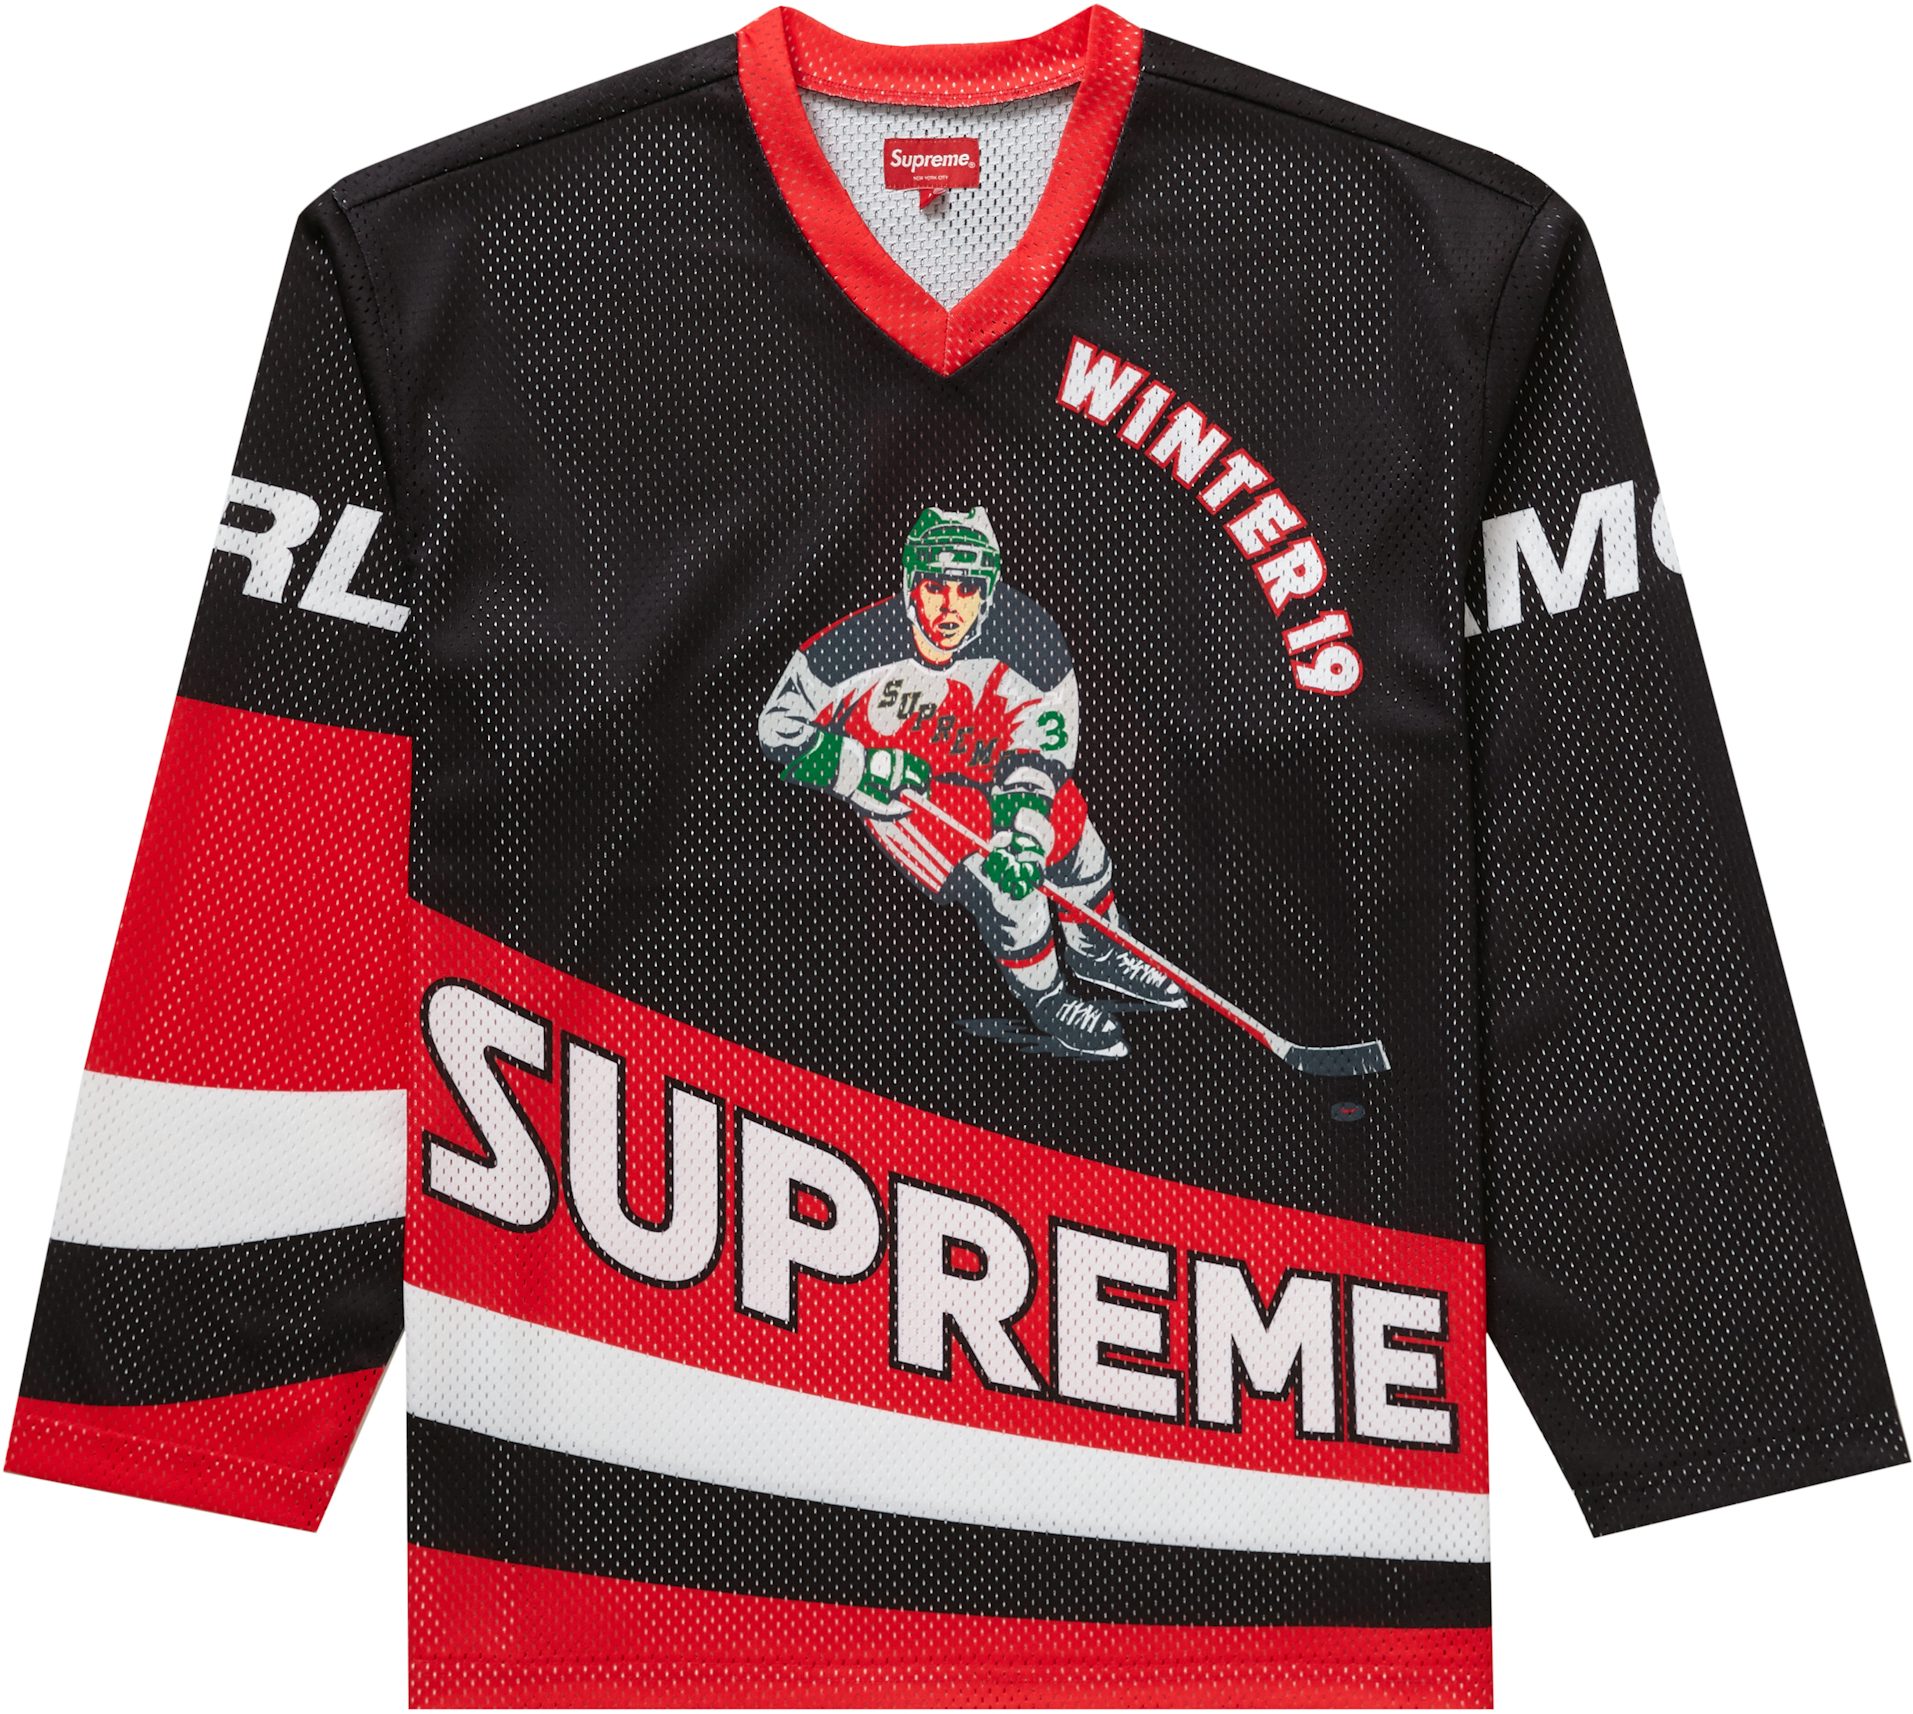 Hockey Jersey Projects  Photos, videos, logos, illustrations and